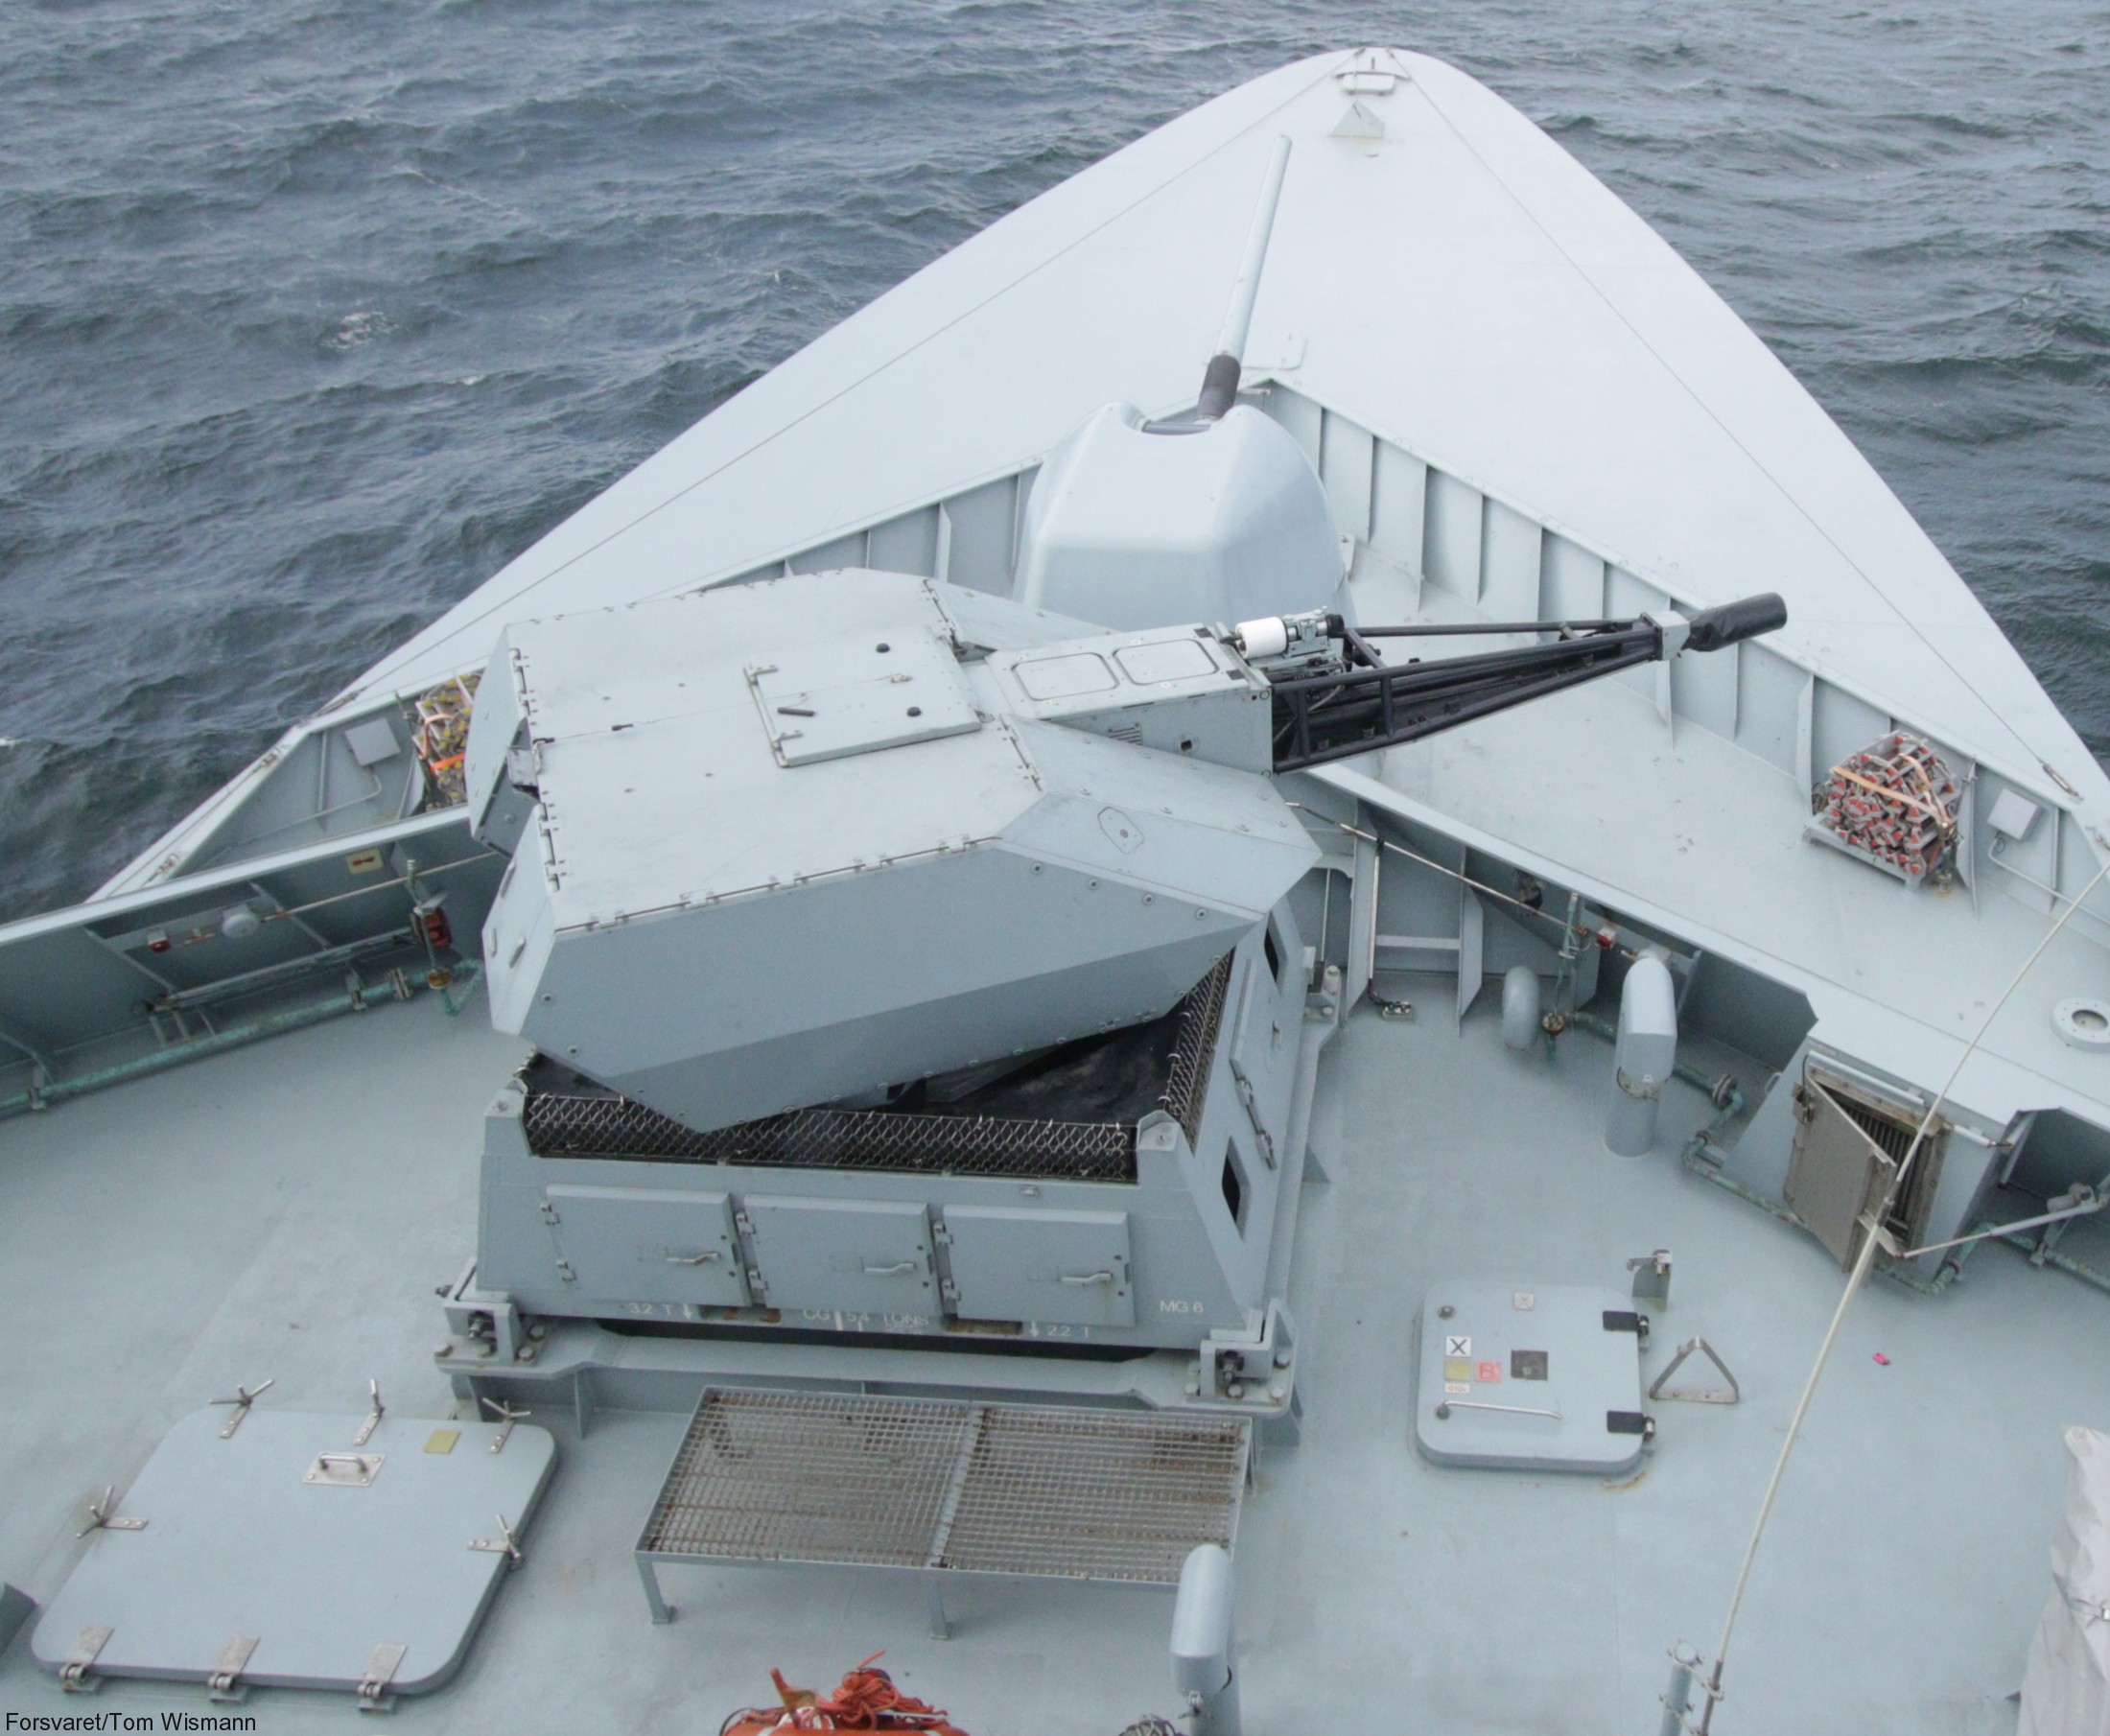 absalon class frigate command support ship royal danish navy 23x oerlikon millennium close-in weapon system ciws